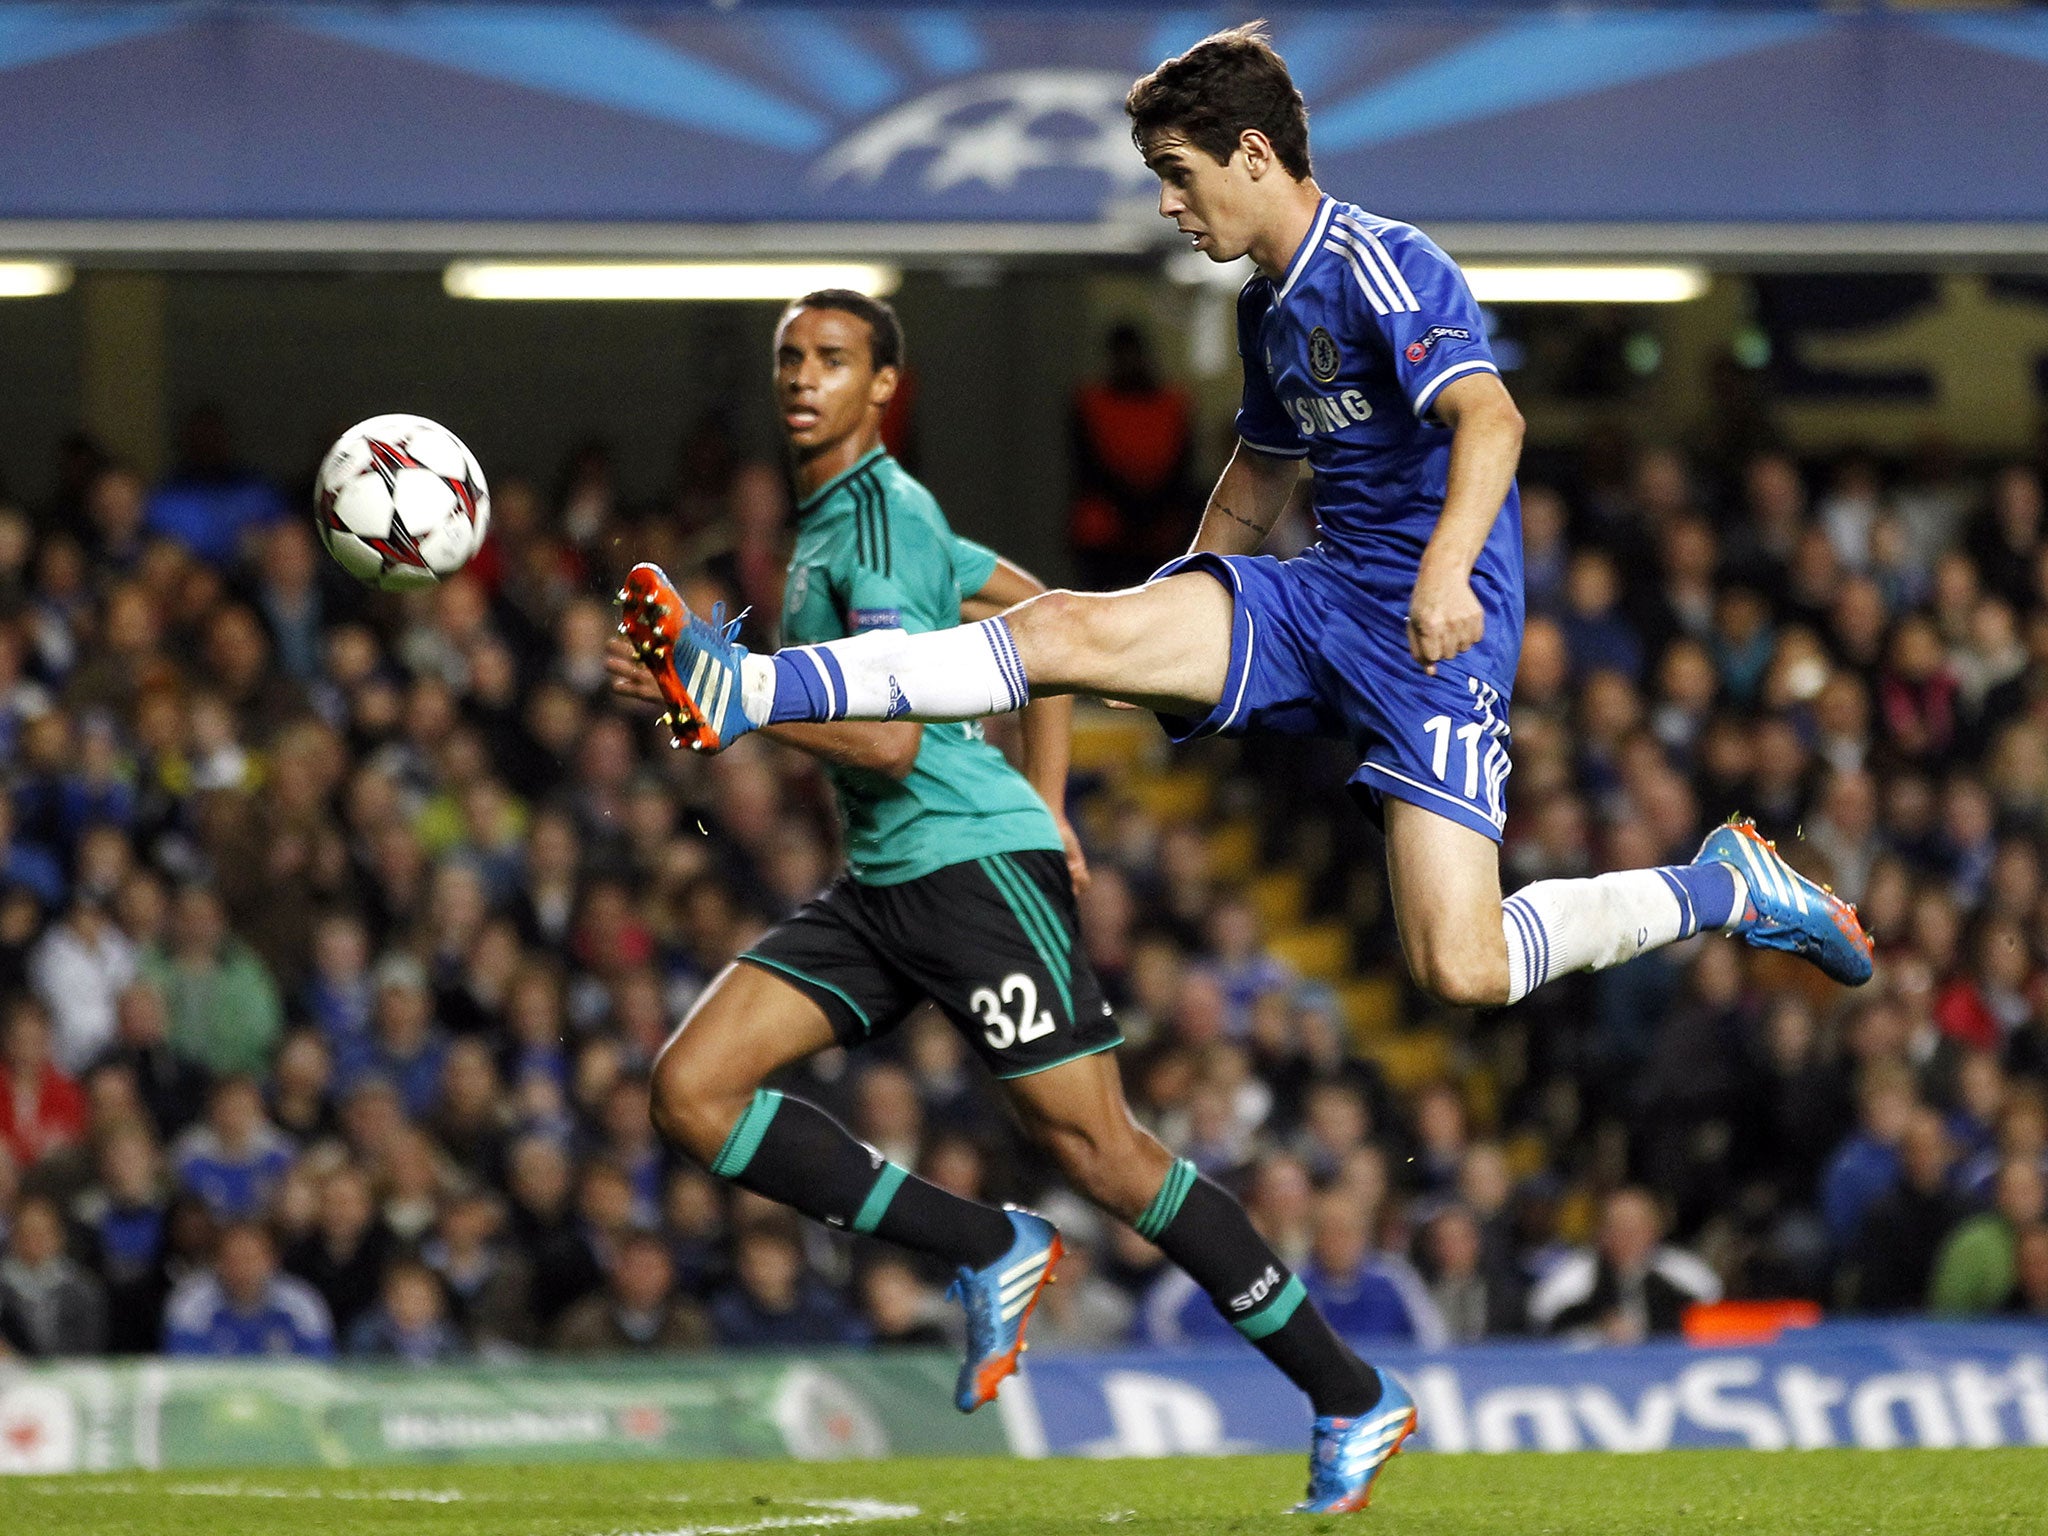 Oscar scores but the goal is disallowed during the UEFA Champions League group E football match between Chelsea and FC Schalke at Stamford Bridge in London on November 6, 2013.